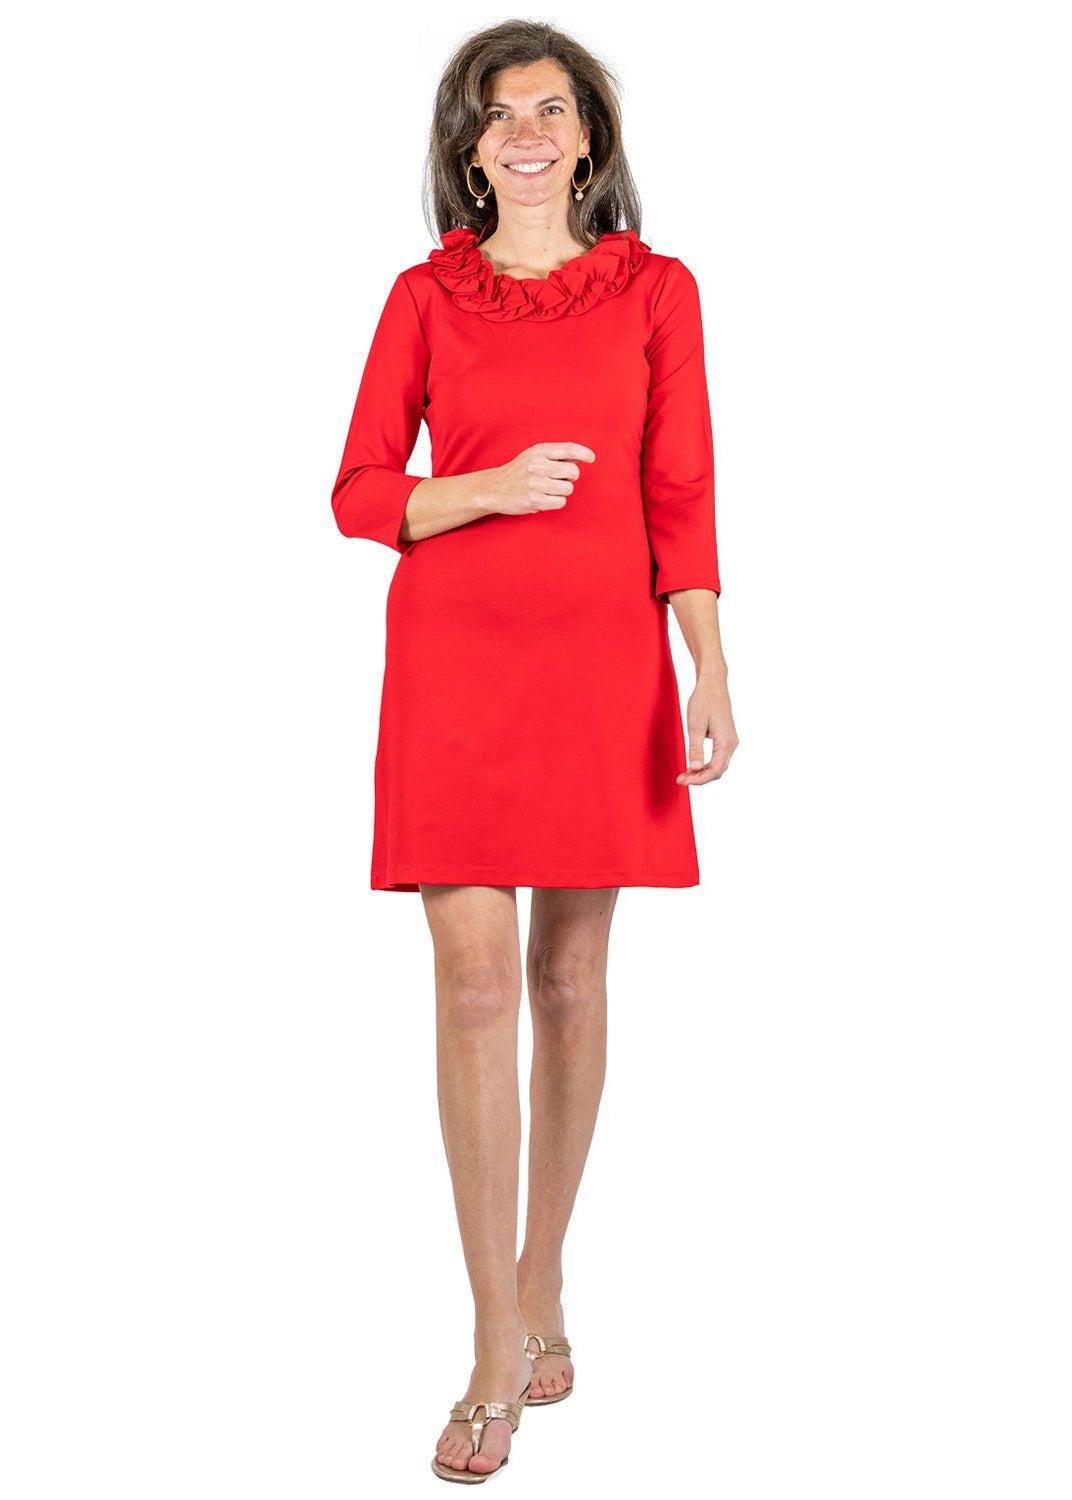 Cricket Dress 3/4 Sleeve - Solid Red